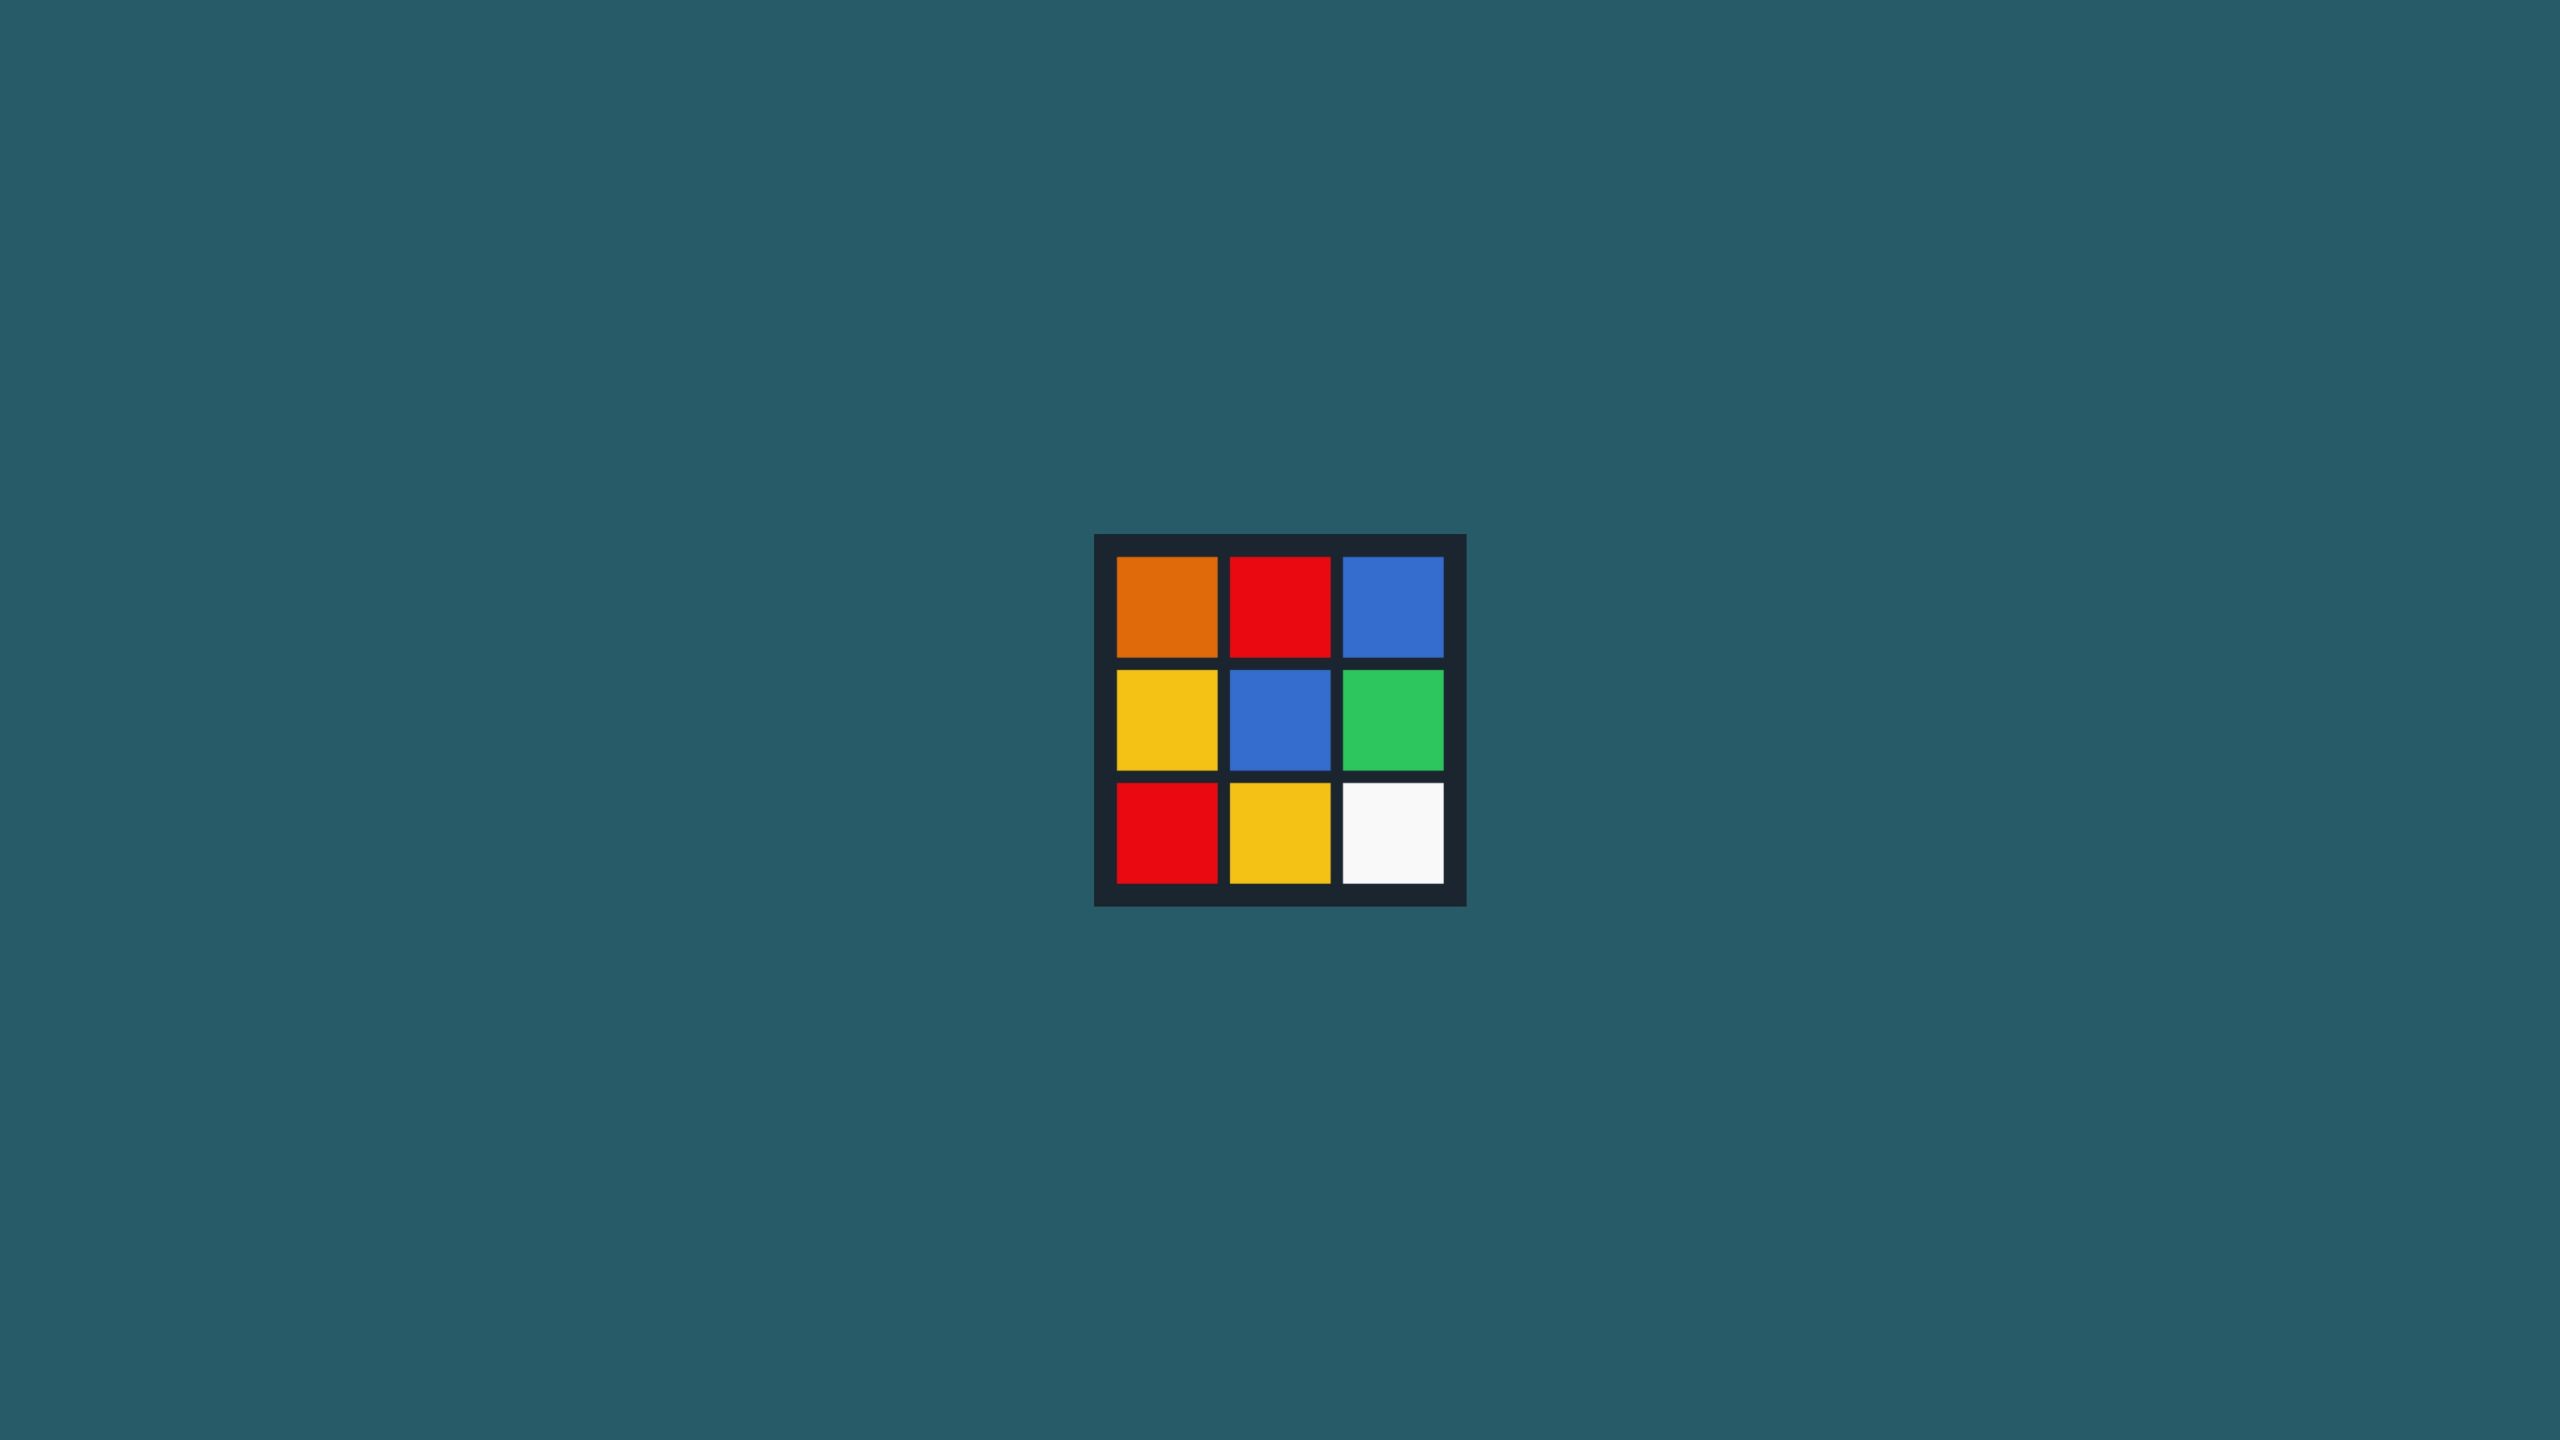 Desktop Wallpaper Rubik's Cube, Toy, Squares, Colorful, Minimal, HD Image, Picture, Background, 7a68c9